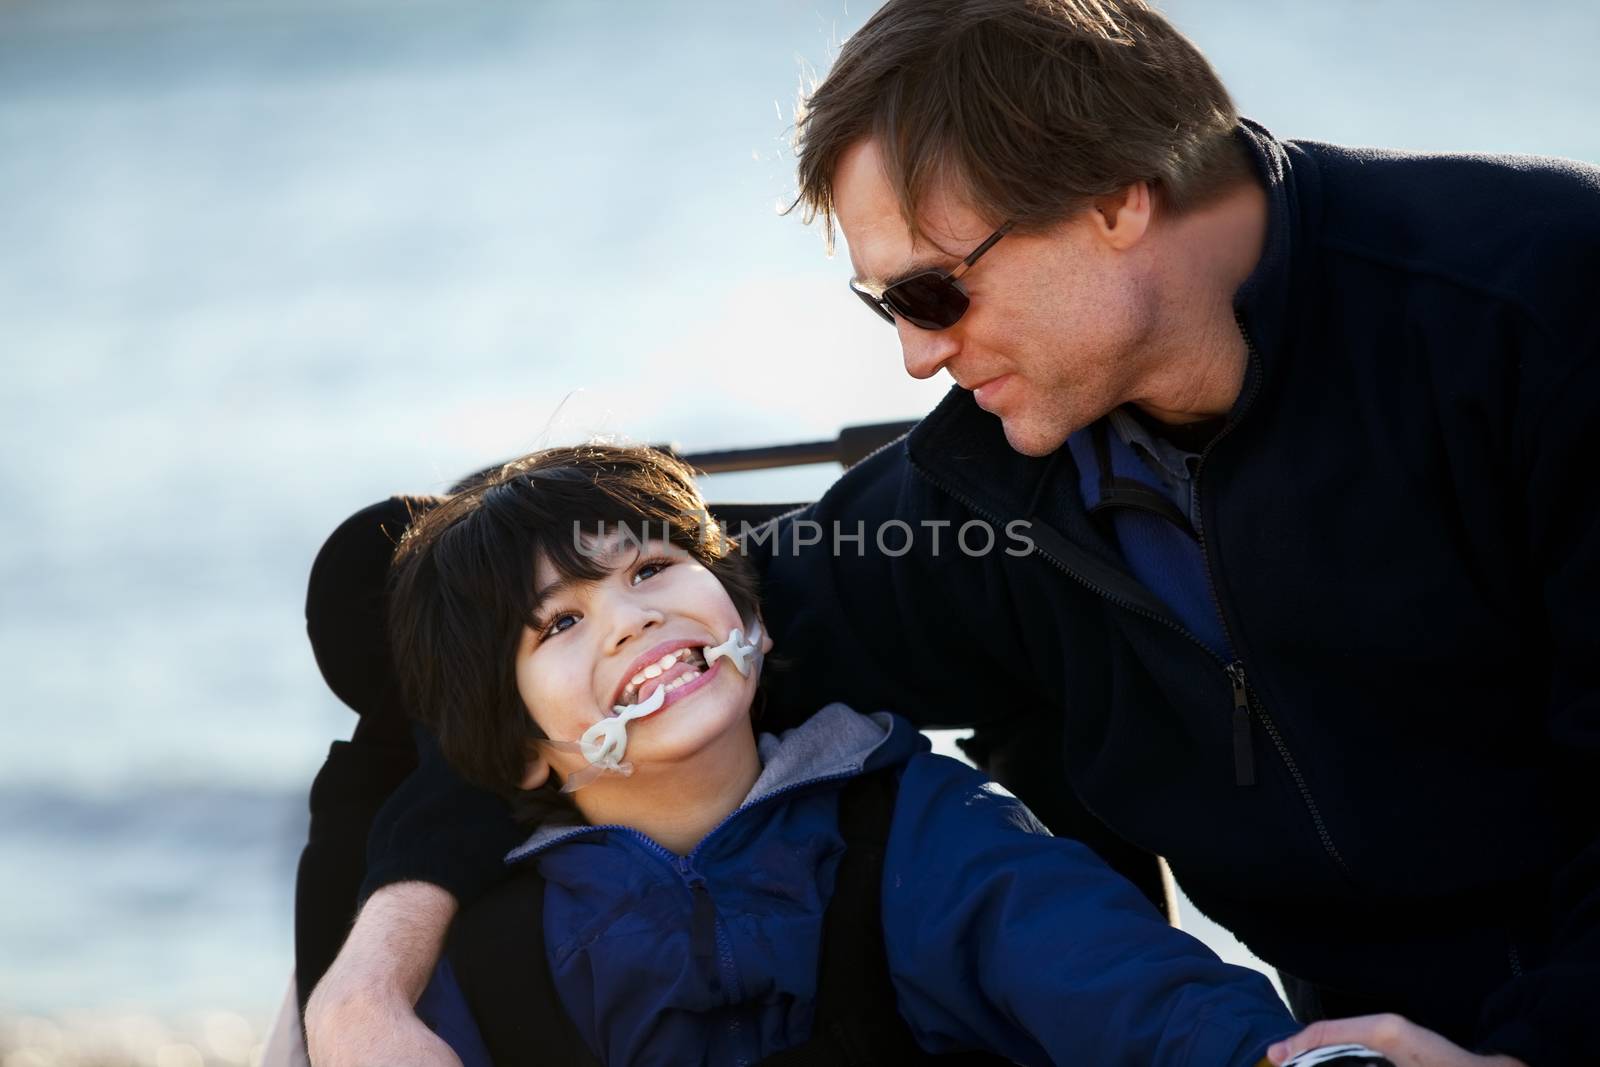 Father sitting with disabled son in wheelchair by lake shore